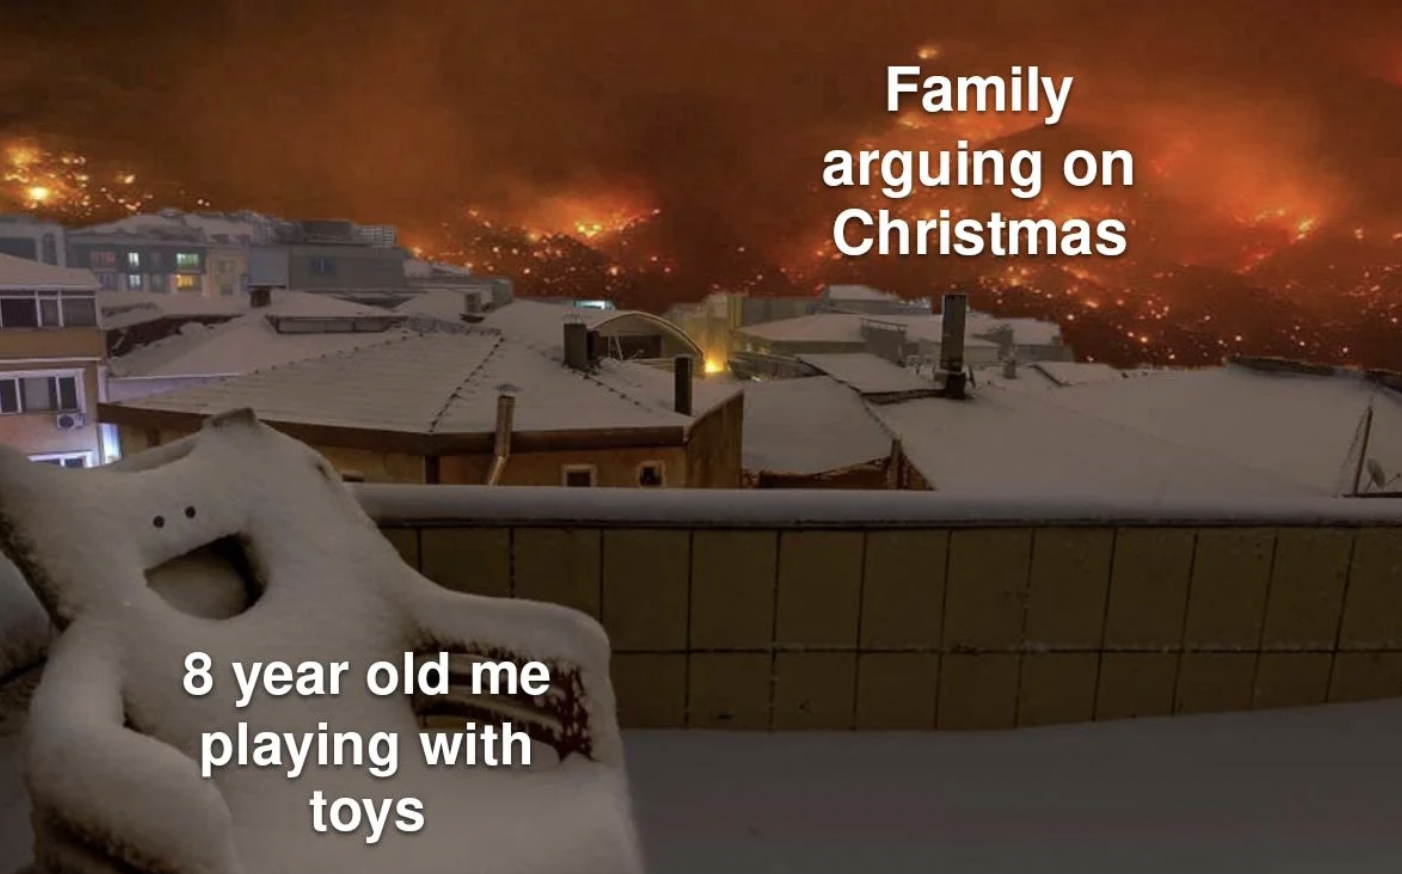 life falling apart meme gif - 8 year old me playing with toys Family arguing on Christmas